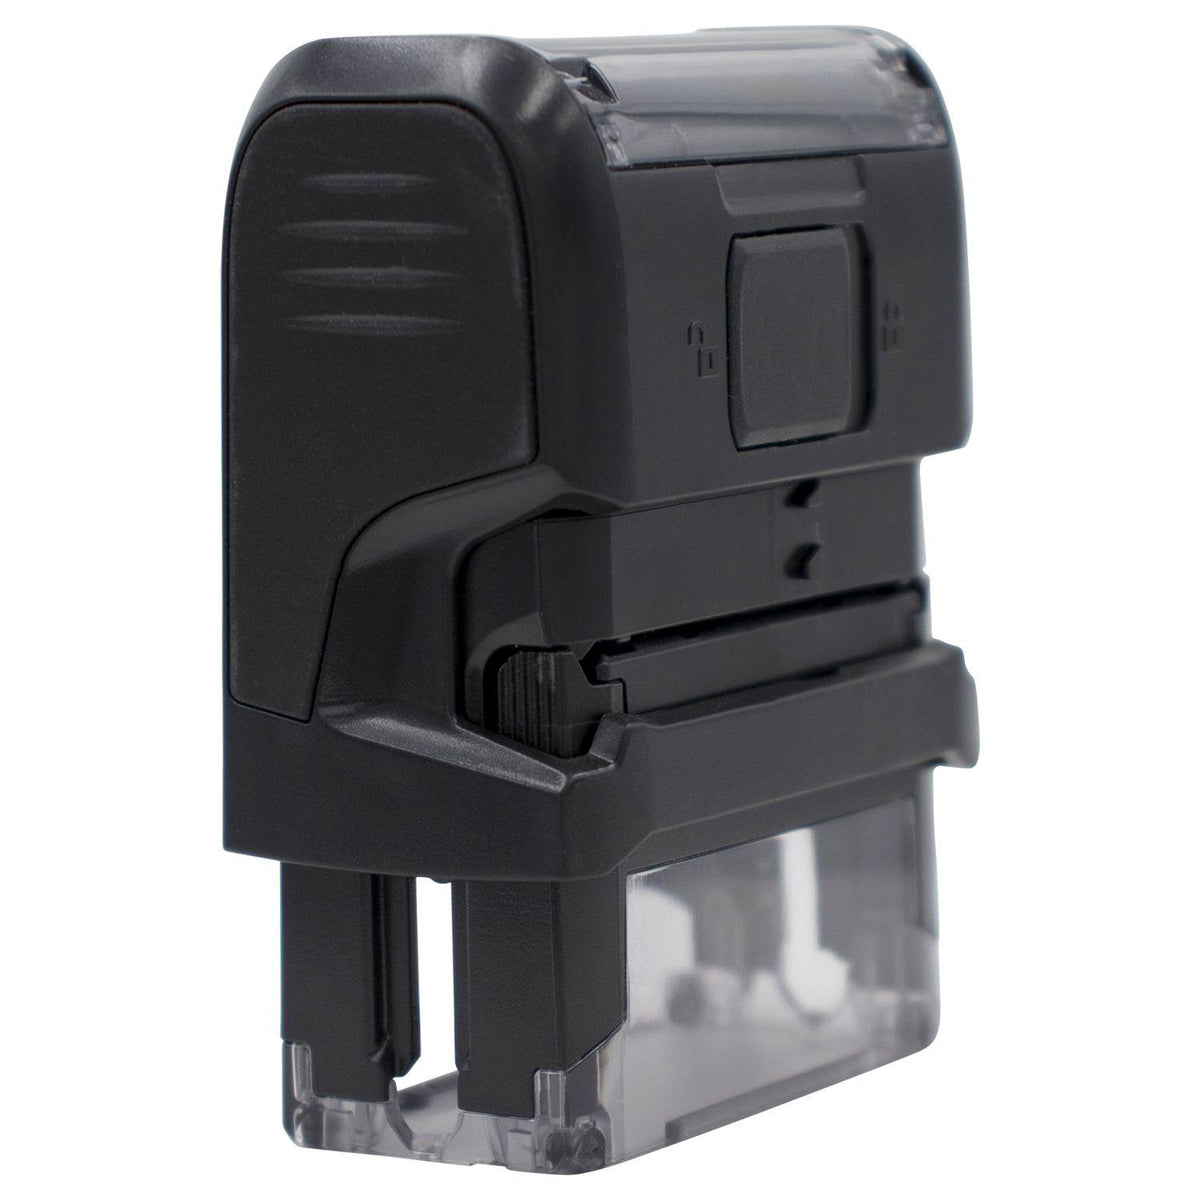 Large Self-Inking Dated Material Open Immediately Stamp - Engineer Seal Stamps - Brand_Trodat, Impression Size_Large, Stamp Type_Self-Inking Stamp, Type of Use_Postal &amp; Mailing